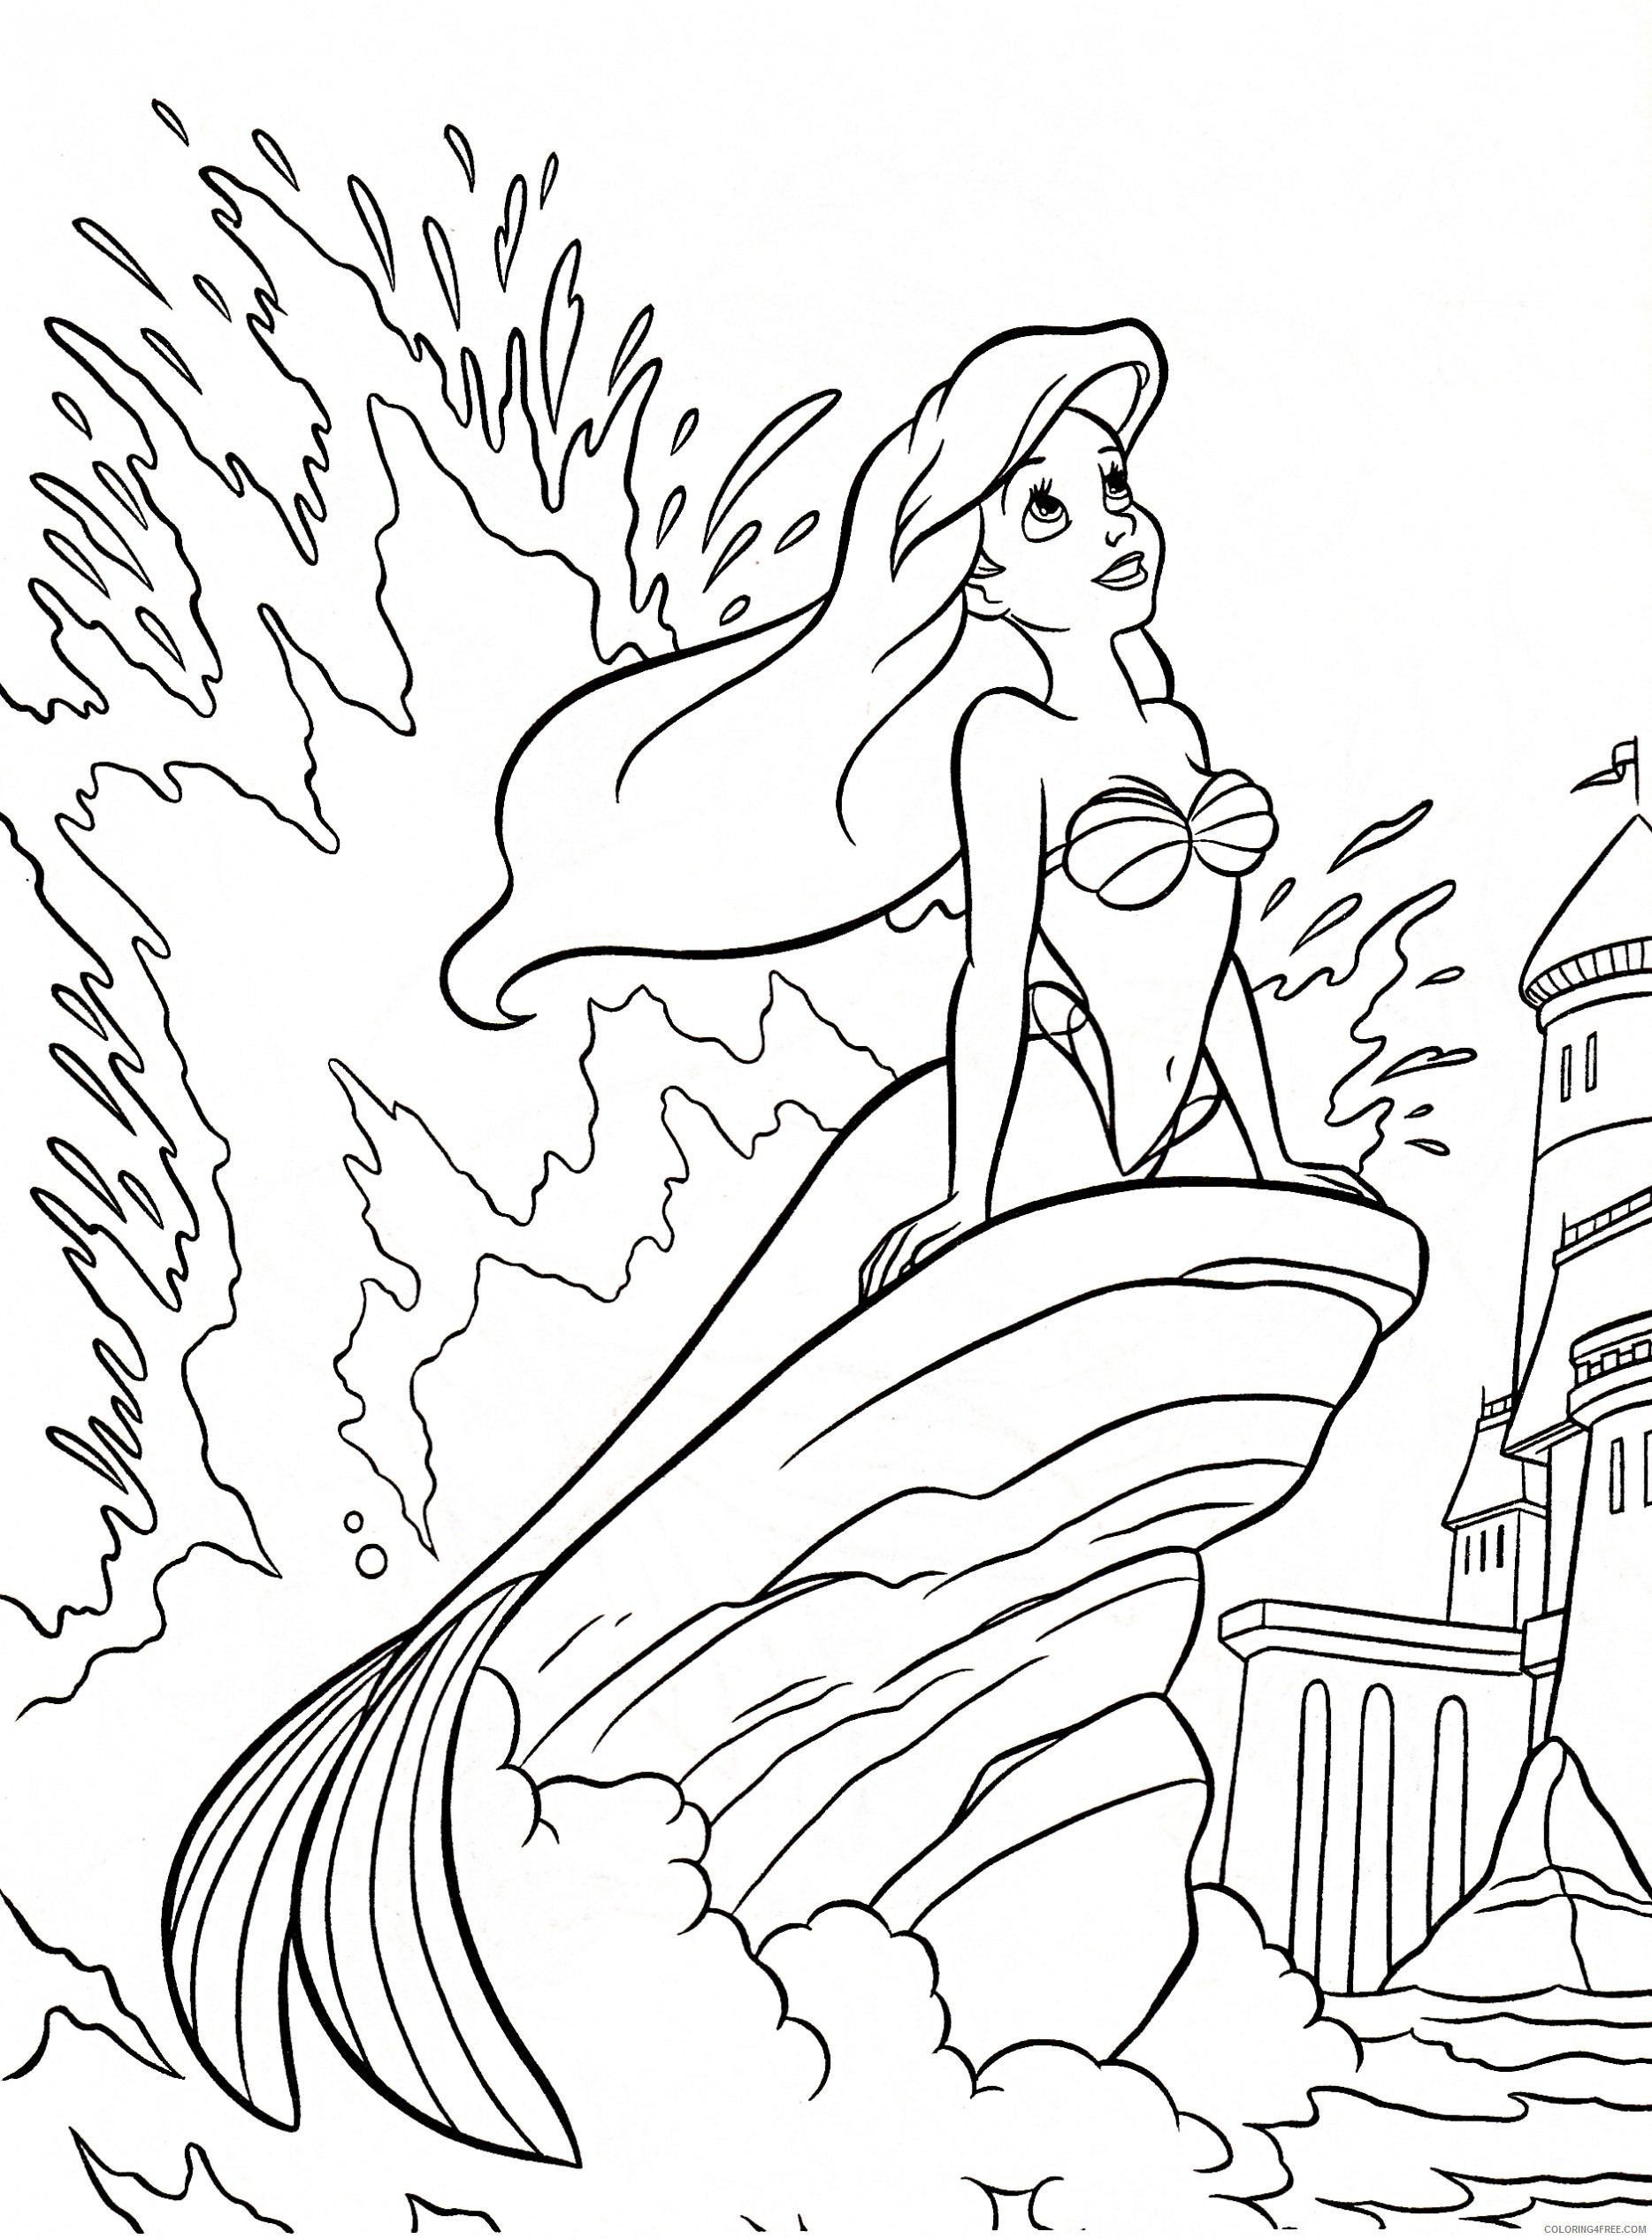 Ariel the Little Mermaid Coloring Pages Cartoons Ariel Disney for Adults Printable 2020 0566 Coloring4free